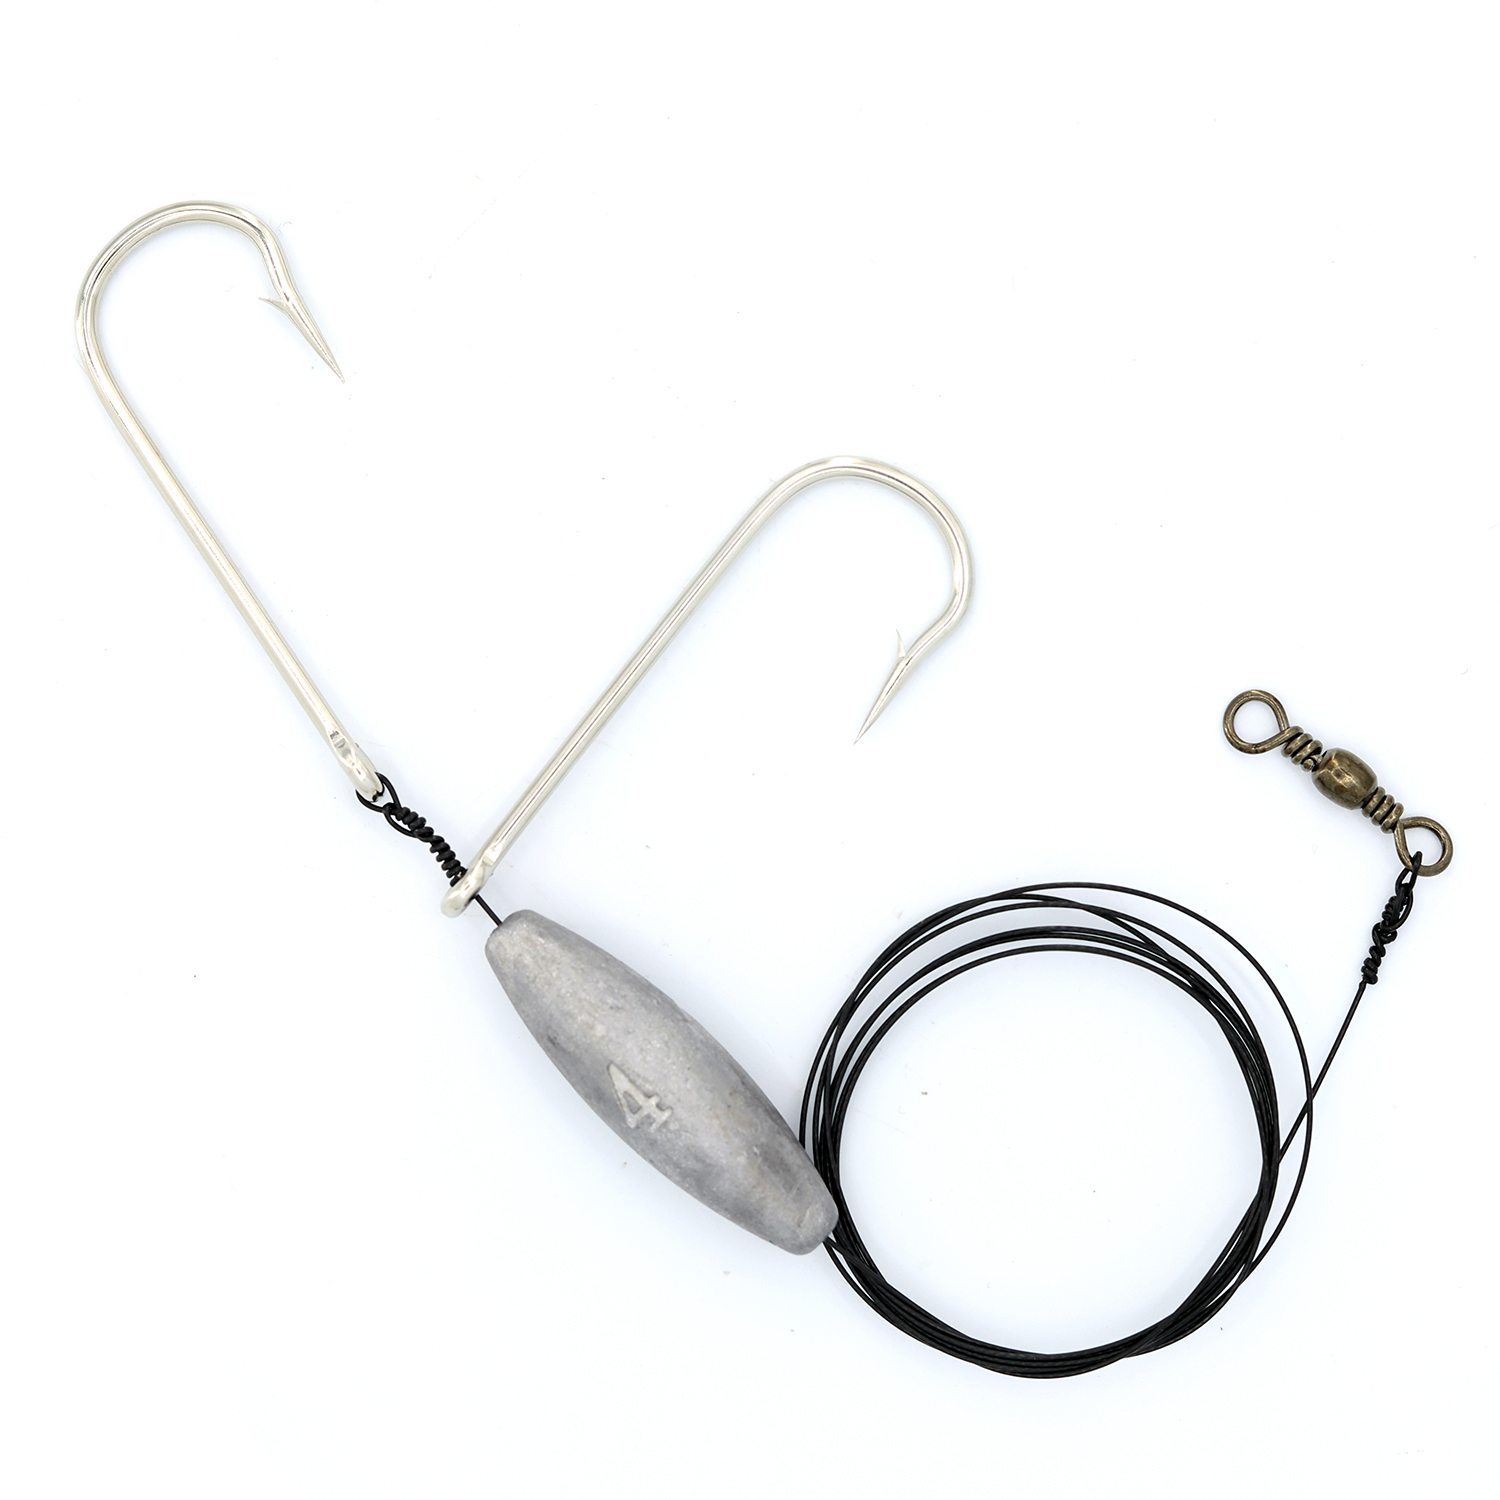 qareb american wire rig with double hooks size 2, sinker size 4